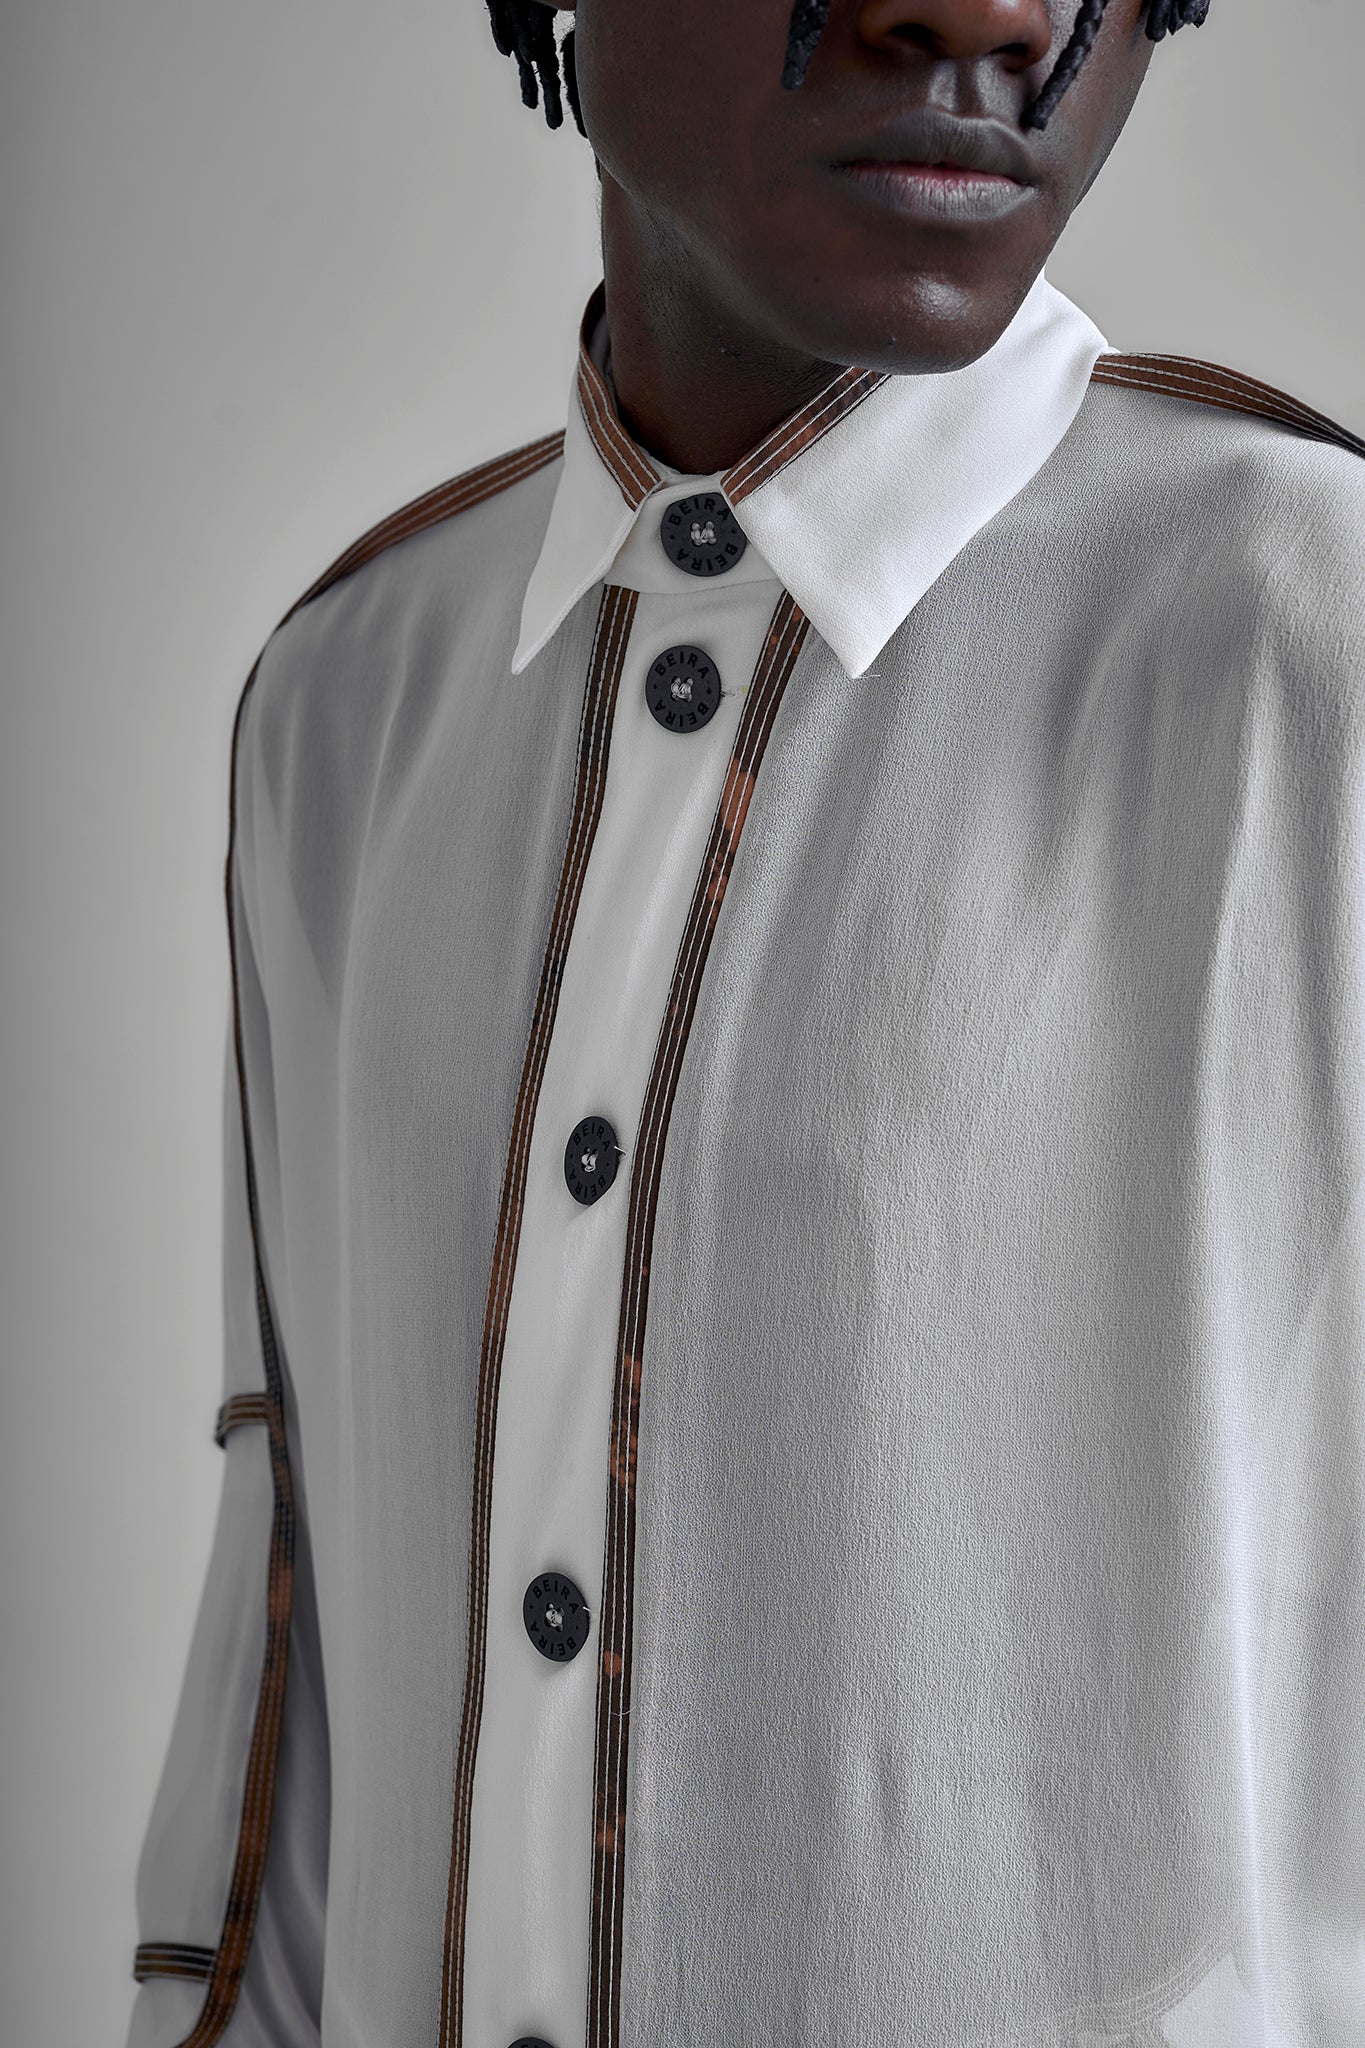 Silk Back Multiple Pieces Shirt - White